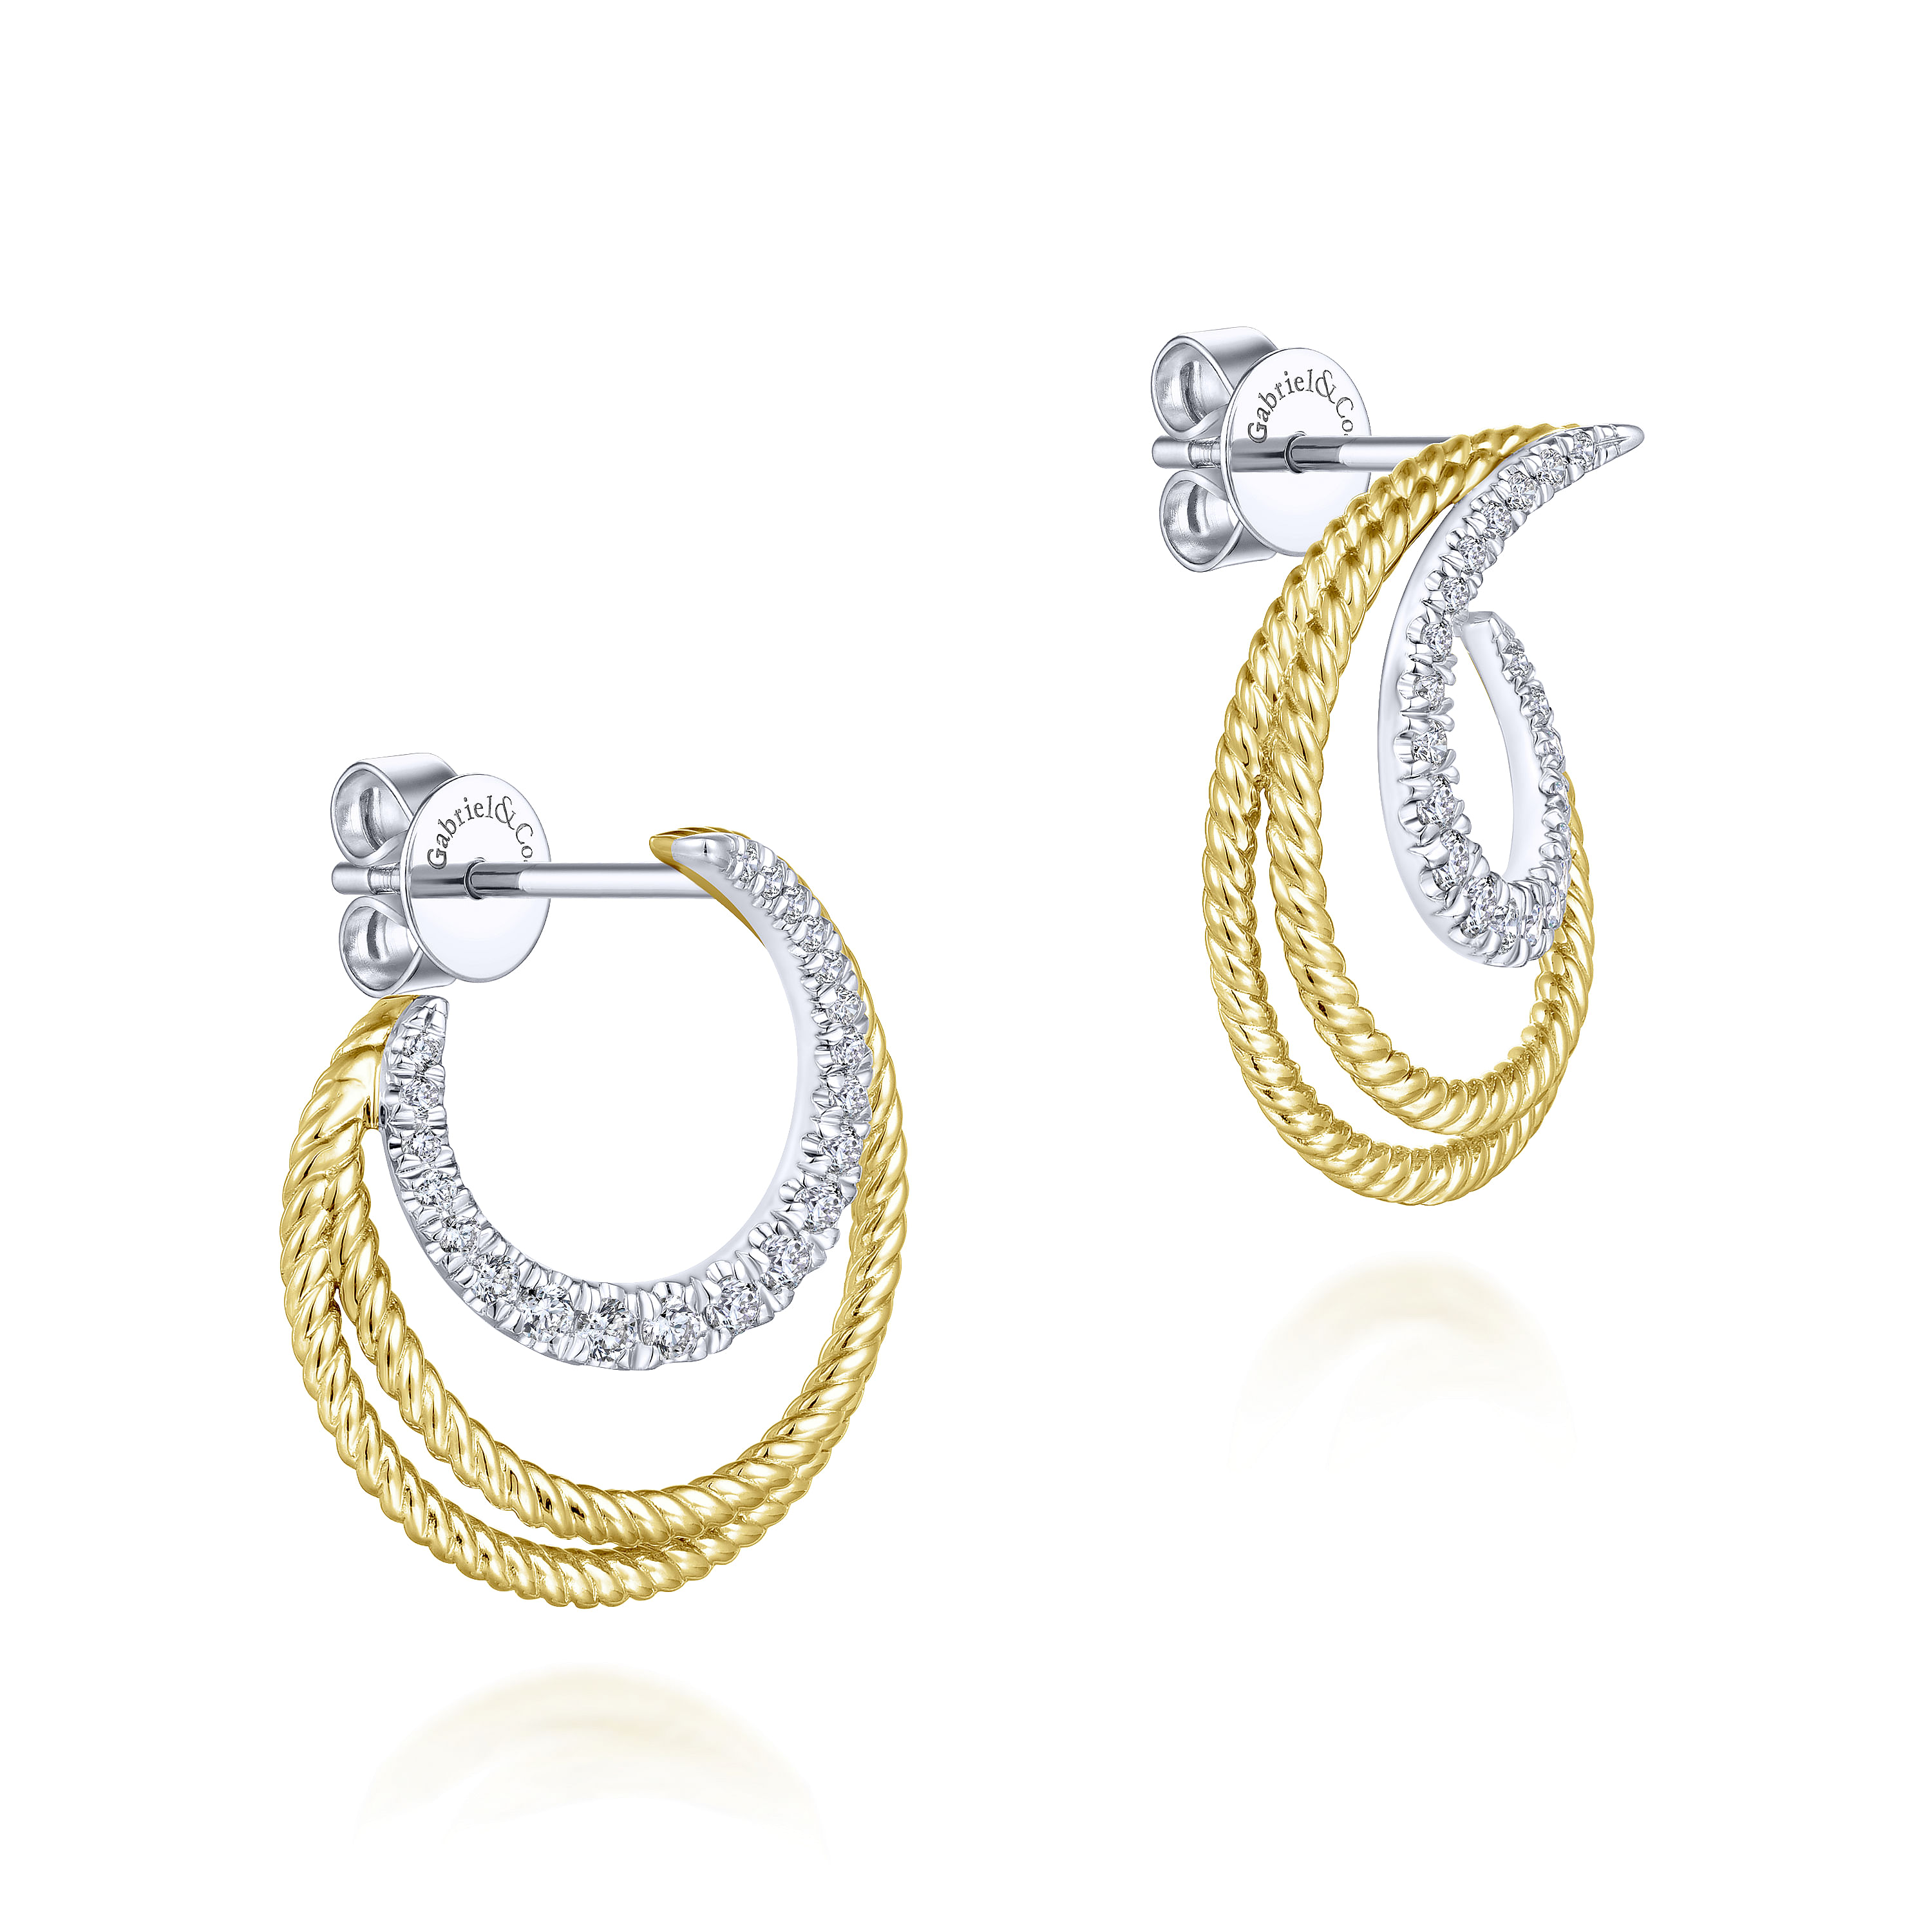 14k Yellow/White Gold Twisted Crescent Diamond Stud Earrings